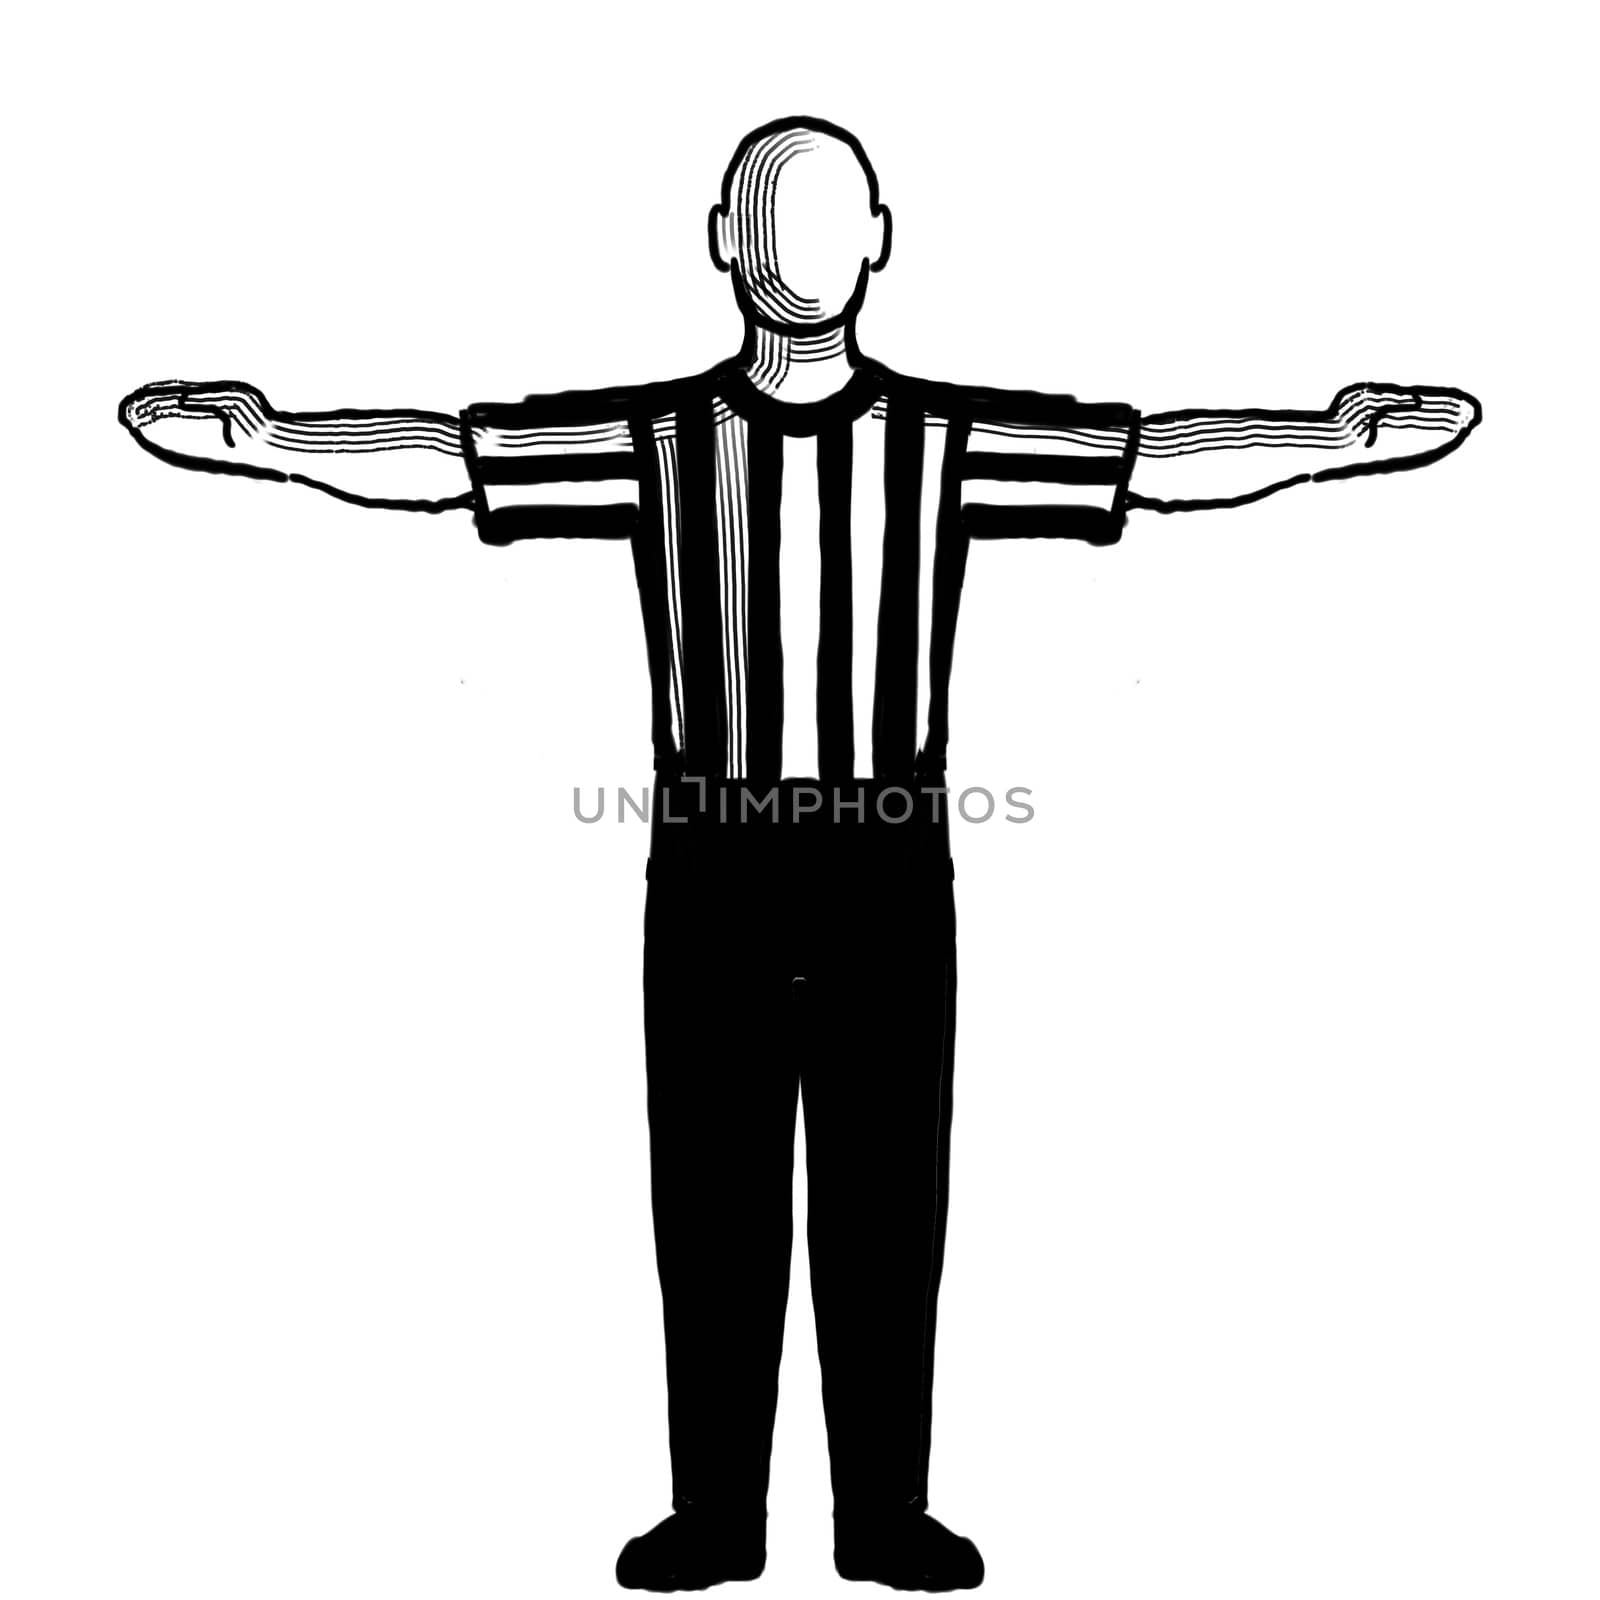 Black and white illustration showing a basketball referee or official with hand signal of 60-second time-out viewed from front on isolated background done retro style.